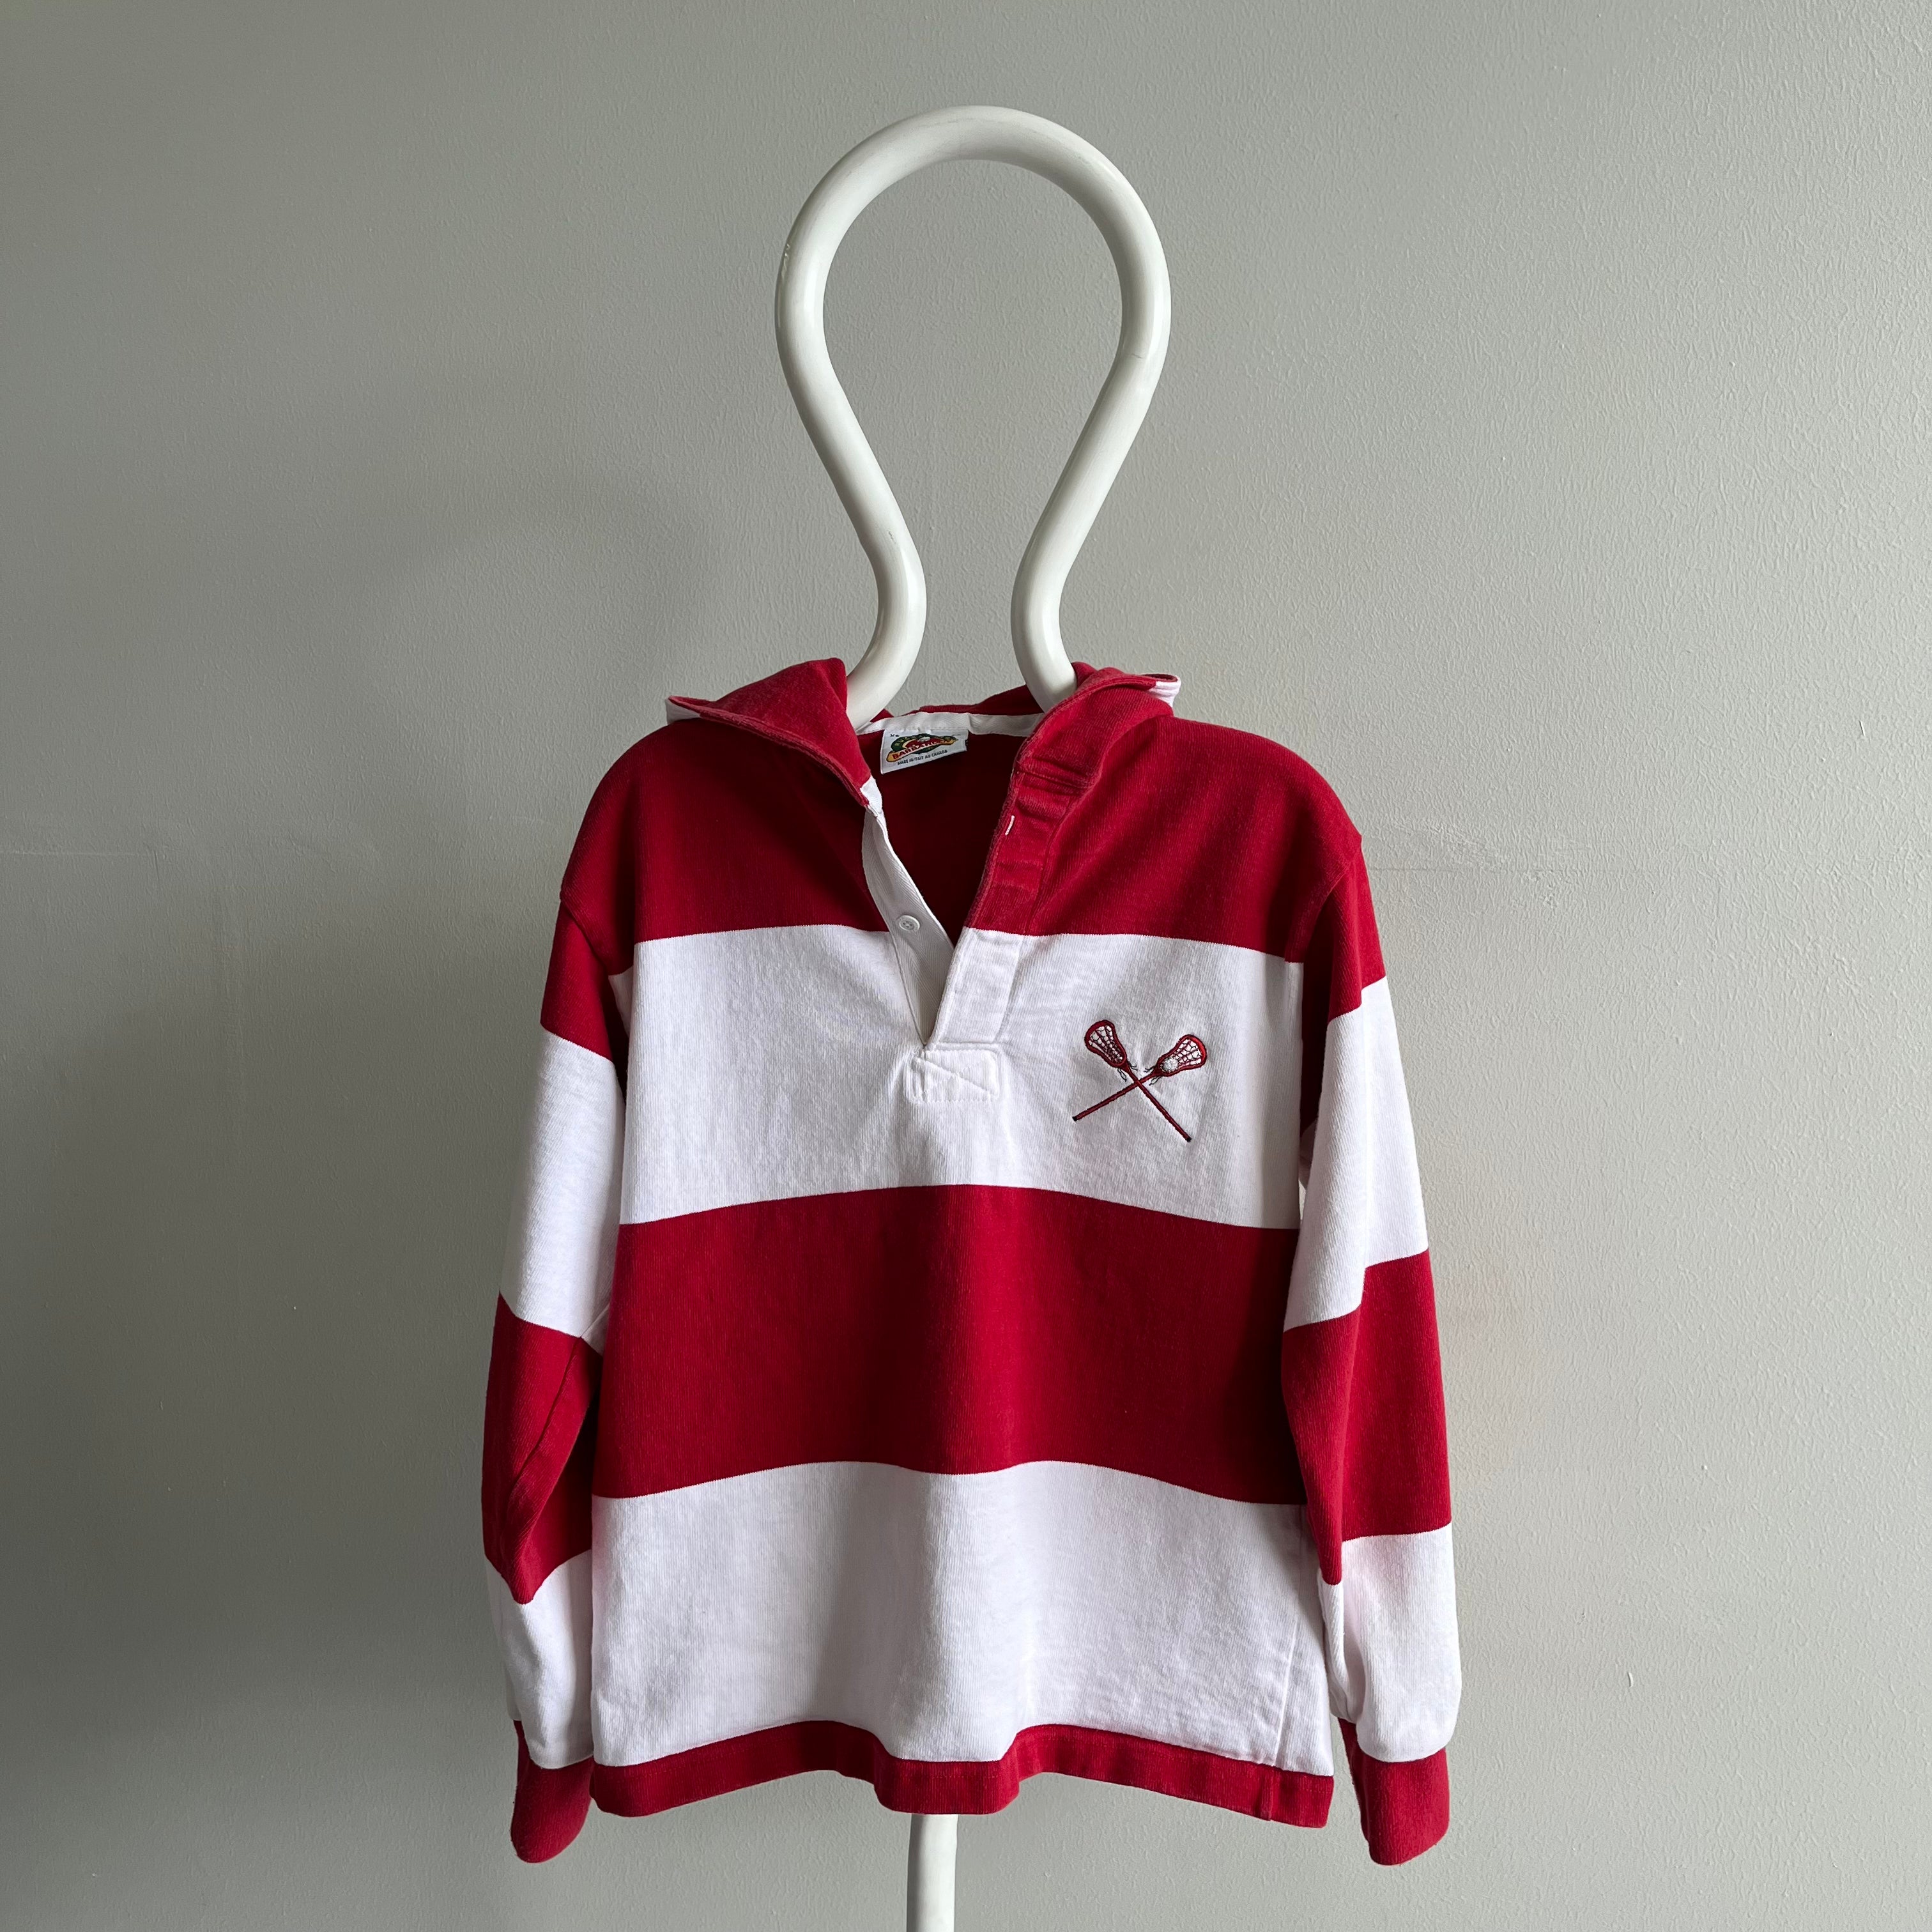 1990s Rad Hooded Rugby LaCrosse Shirt - Rare petite taille